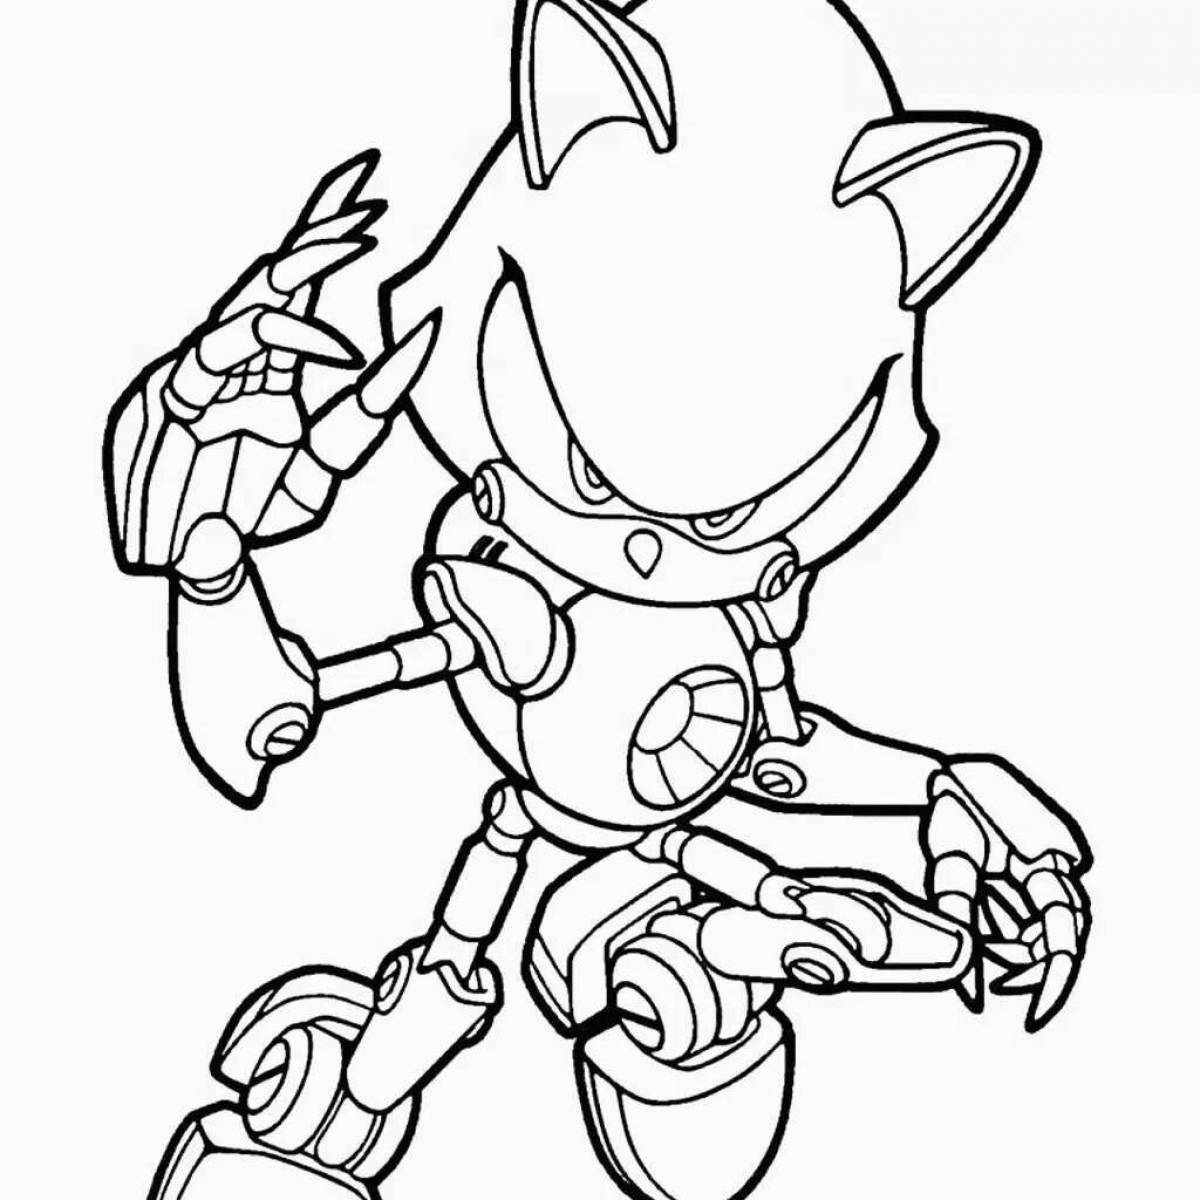 Sonic iron bright coloring